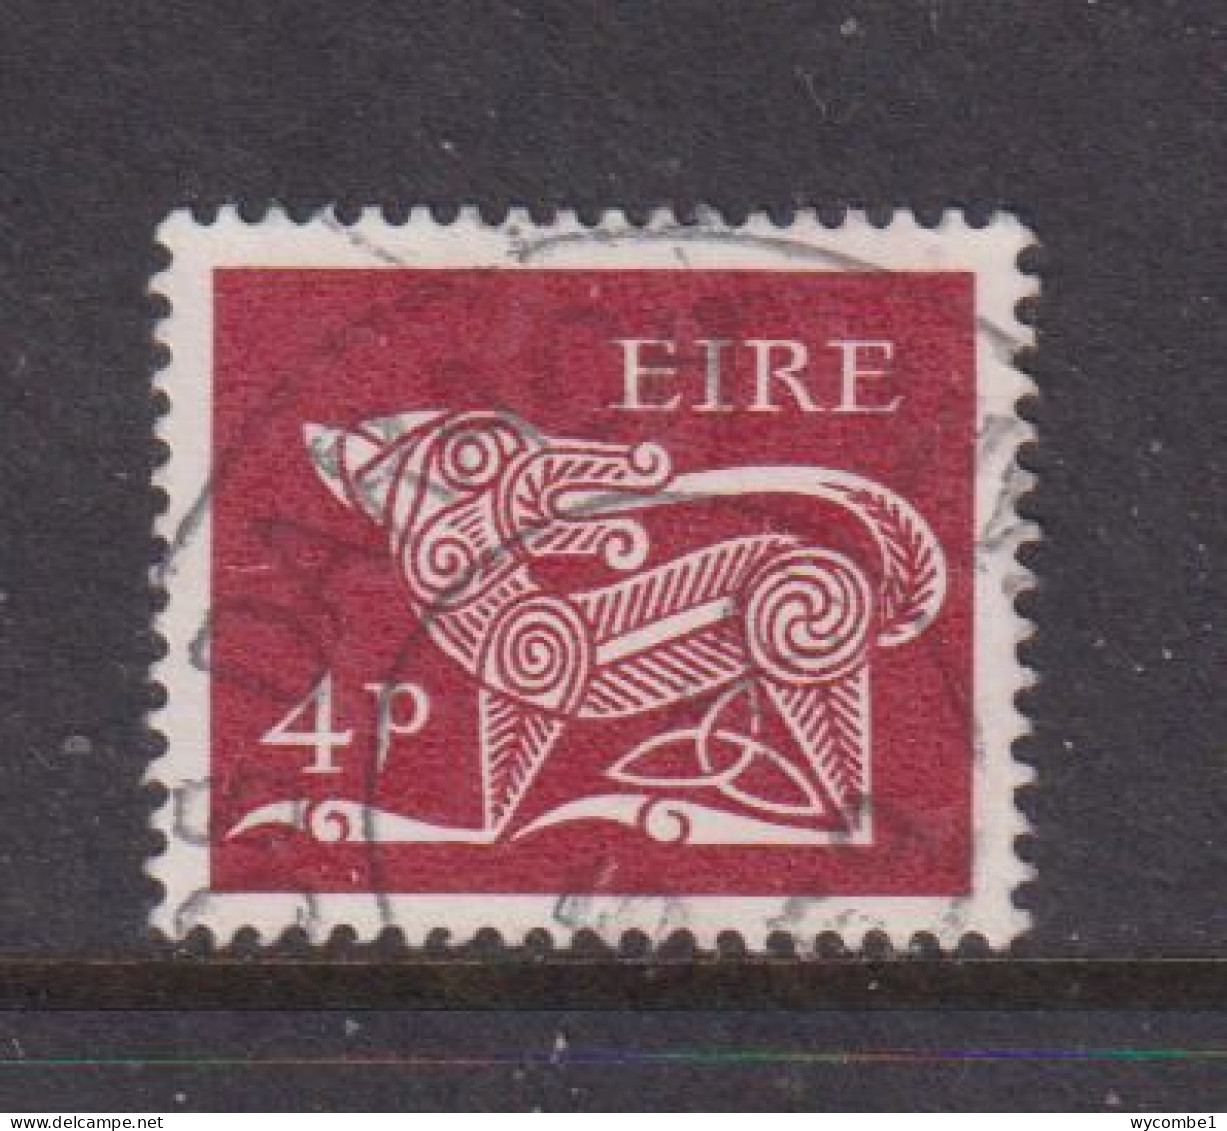 IRELAND - 1968  Definitives  4d  Used As Scan - Gebraucht